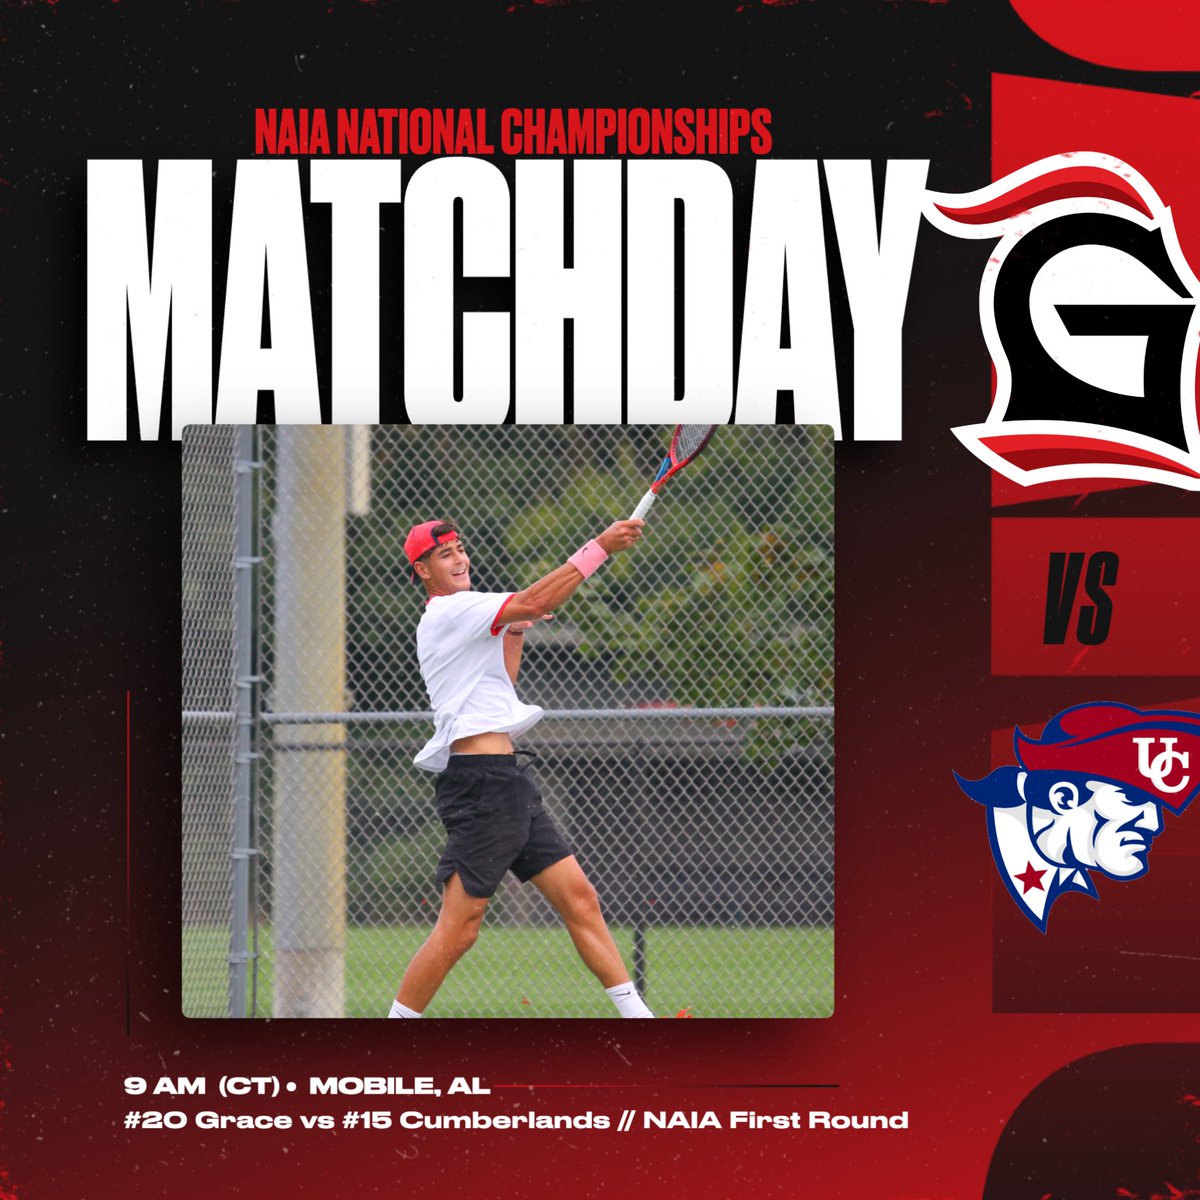 Early-morning start at NAIA Nationals for Grace Men's Tennis! Lancers battle with Cumberlands in the NAIA First Round at 9am (C.T.) in Mobile, AL! #LancerUp